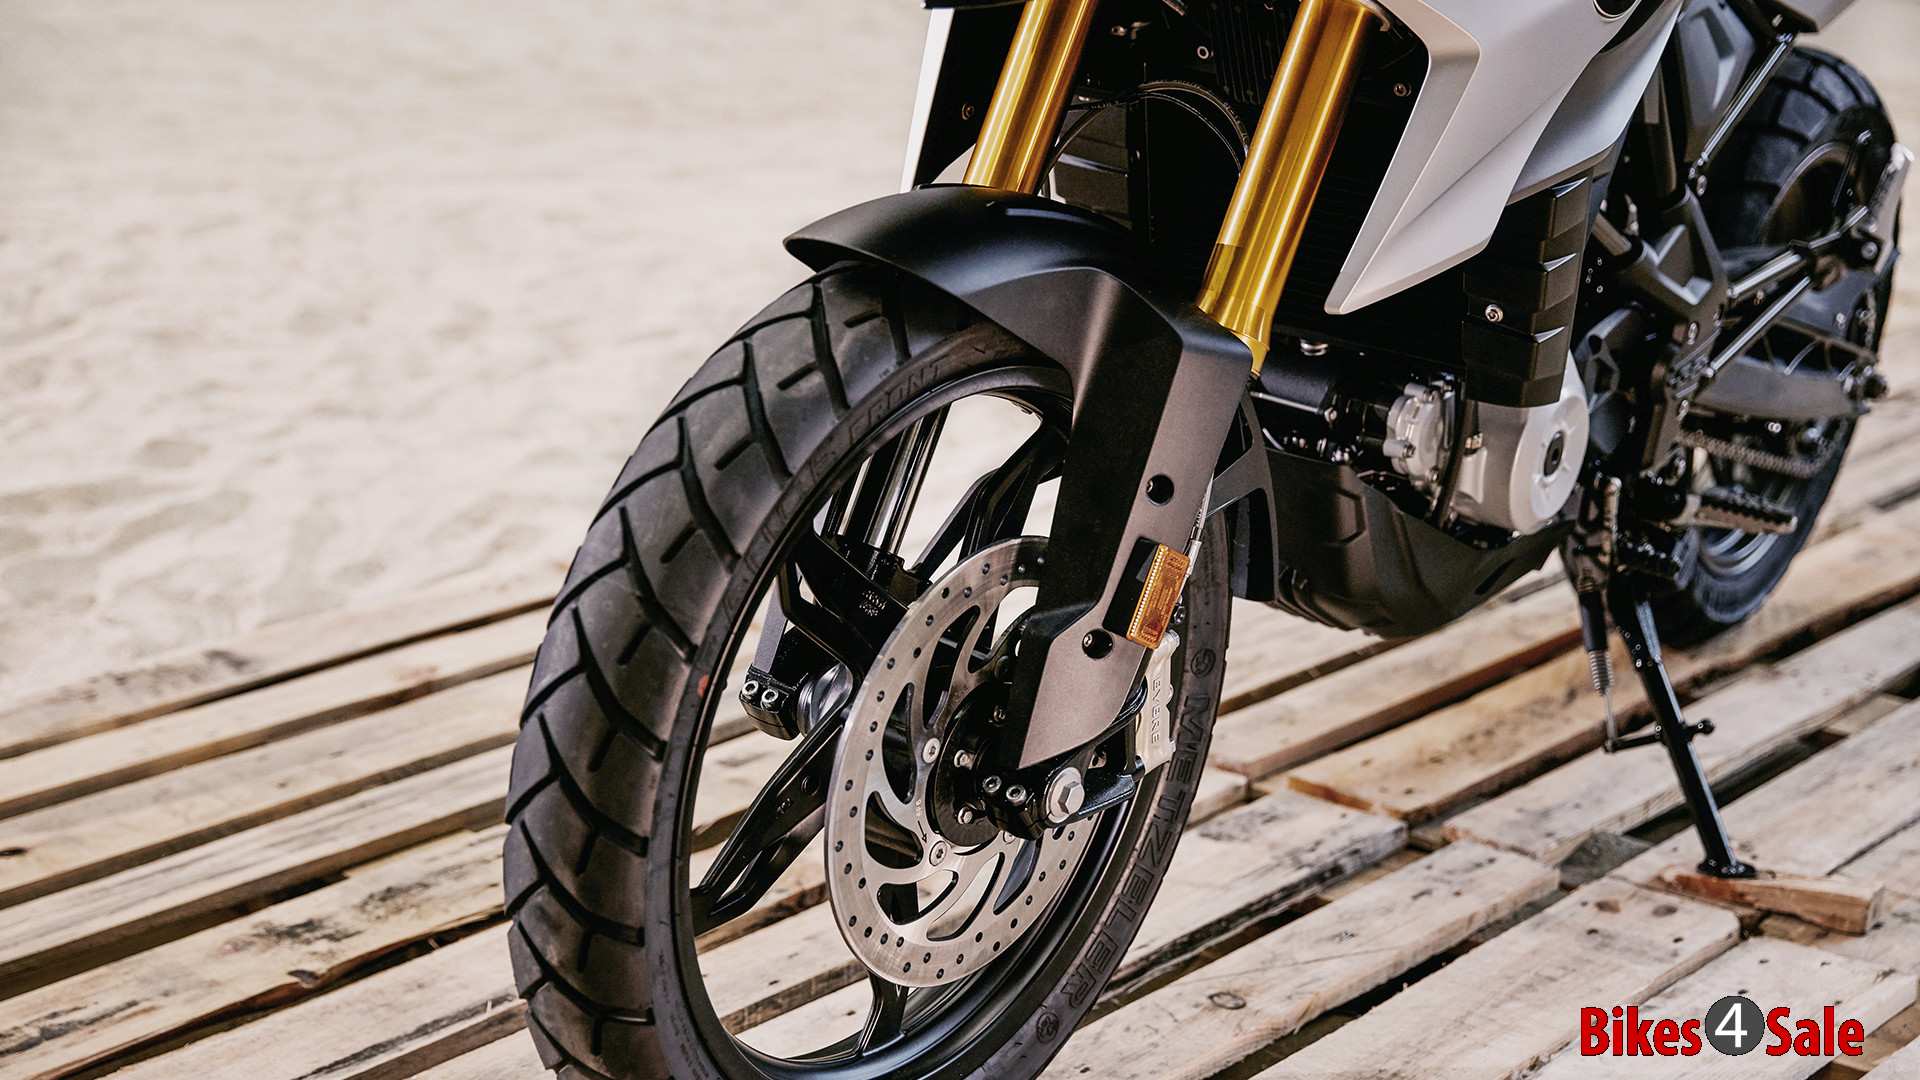 BMW G 310 GS - Gold-anodised USD fork